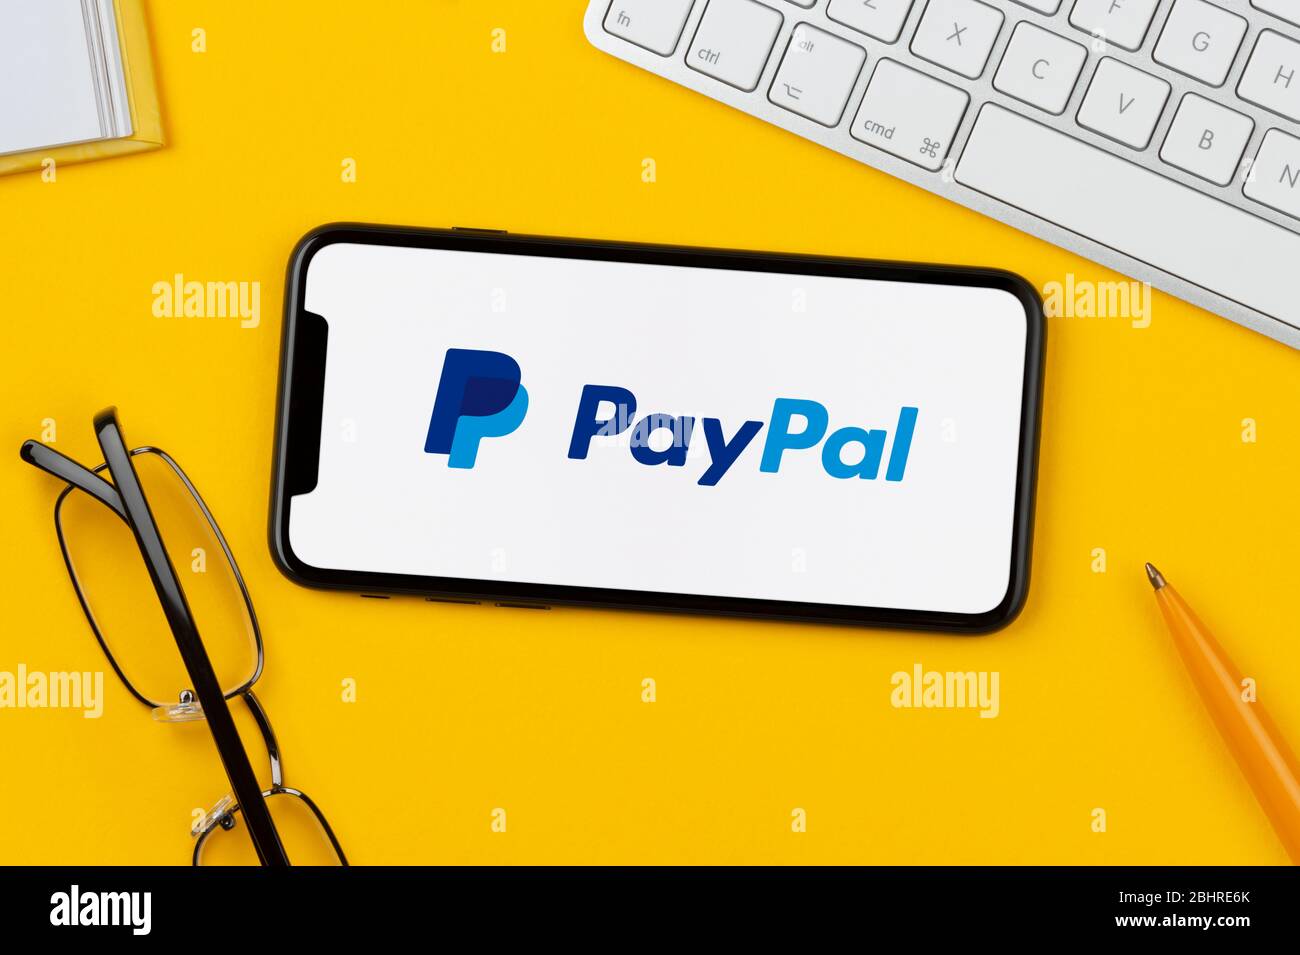 A smartphone showing the PayPal logo rests on a yellow background along with a keyboard, glasses, pen and book (Editorial use only). Stock Photo